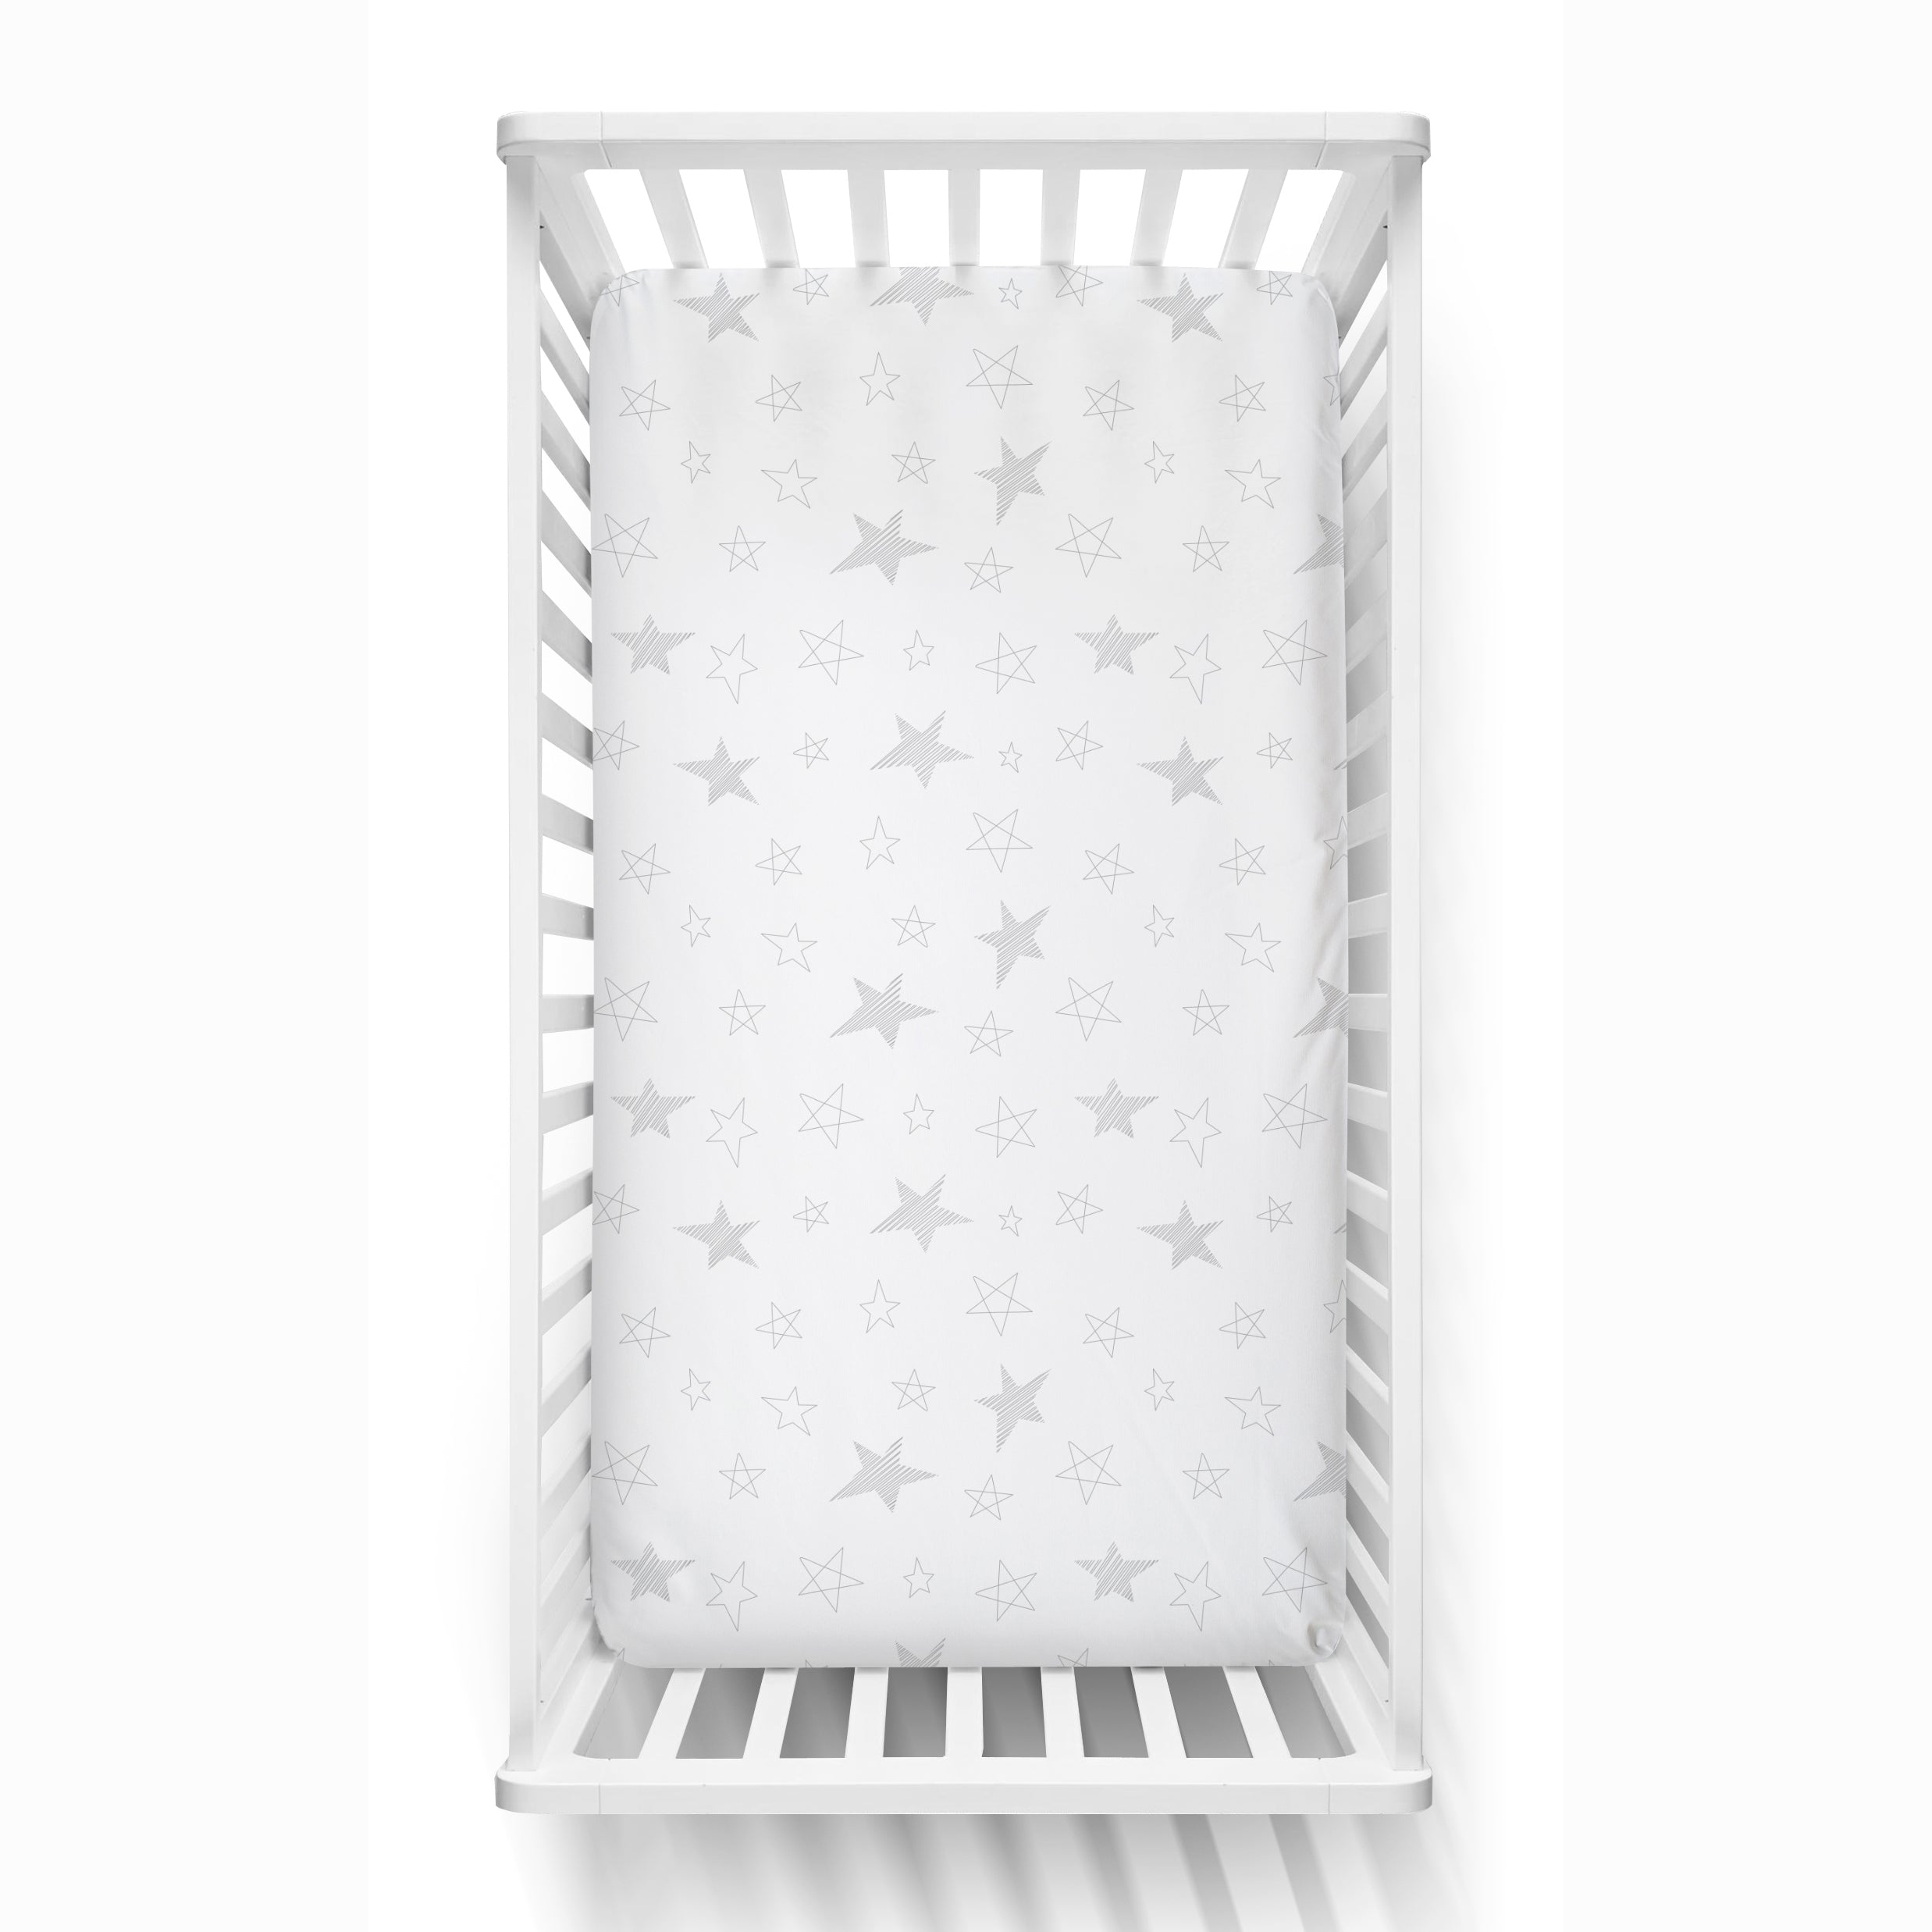 The White Cradle Pure Organic Cotton Fitted Cot Sheet for Baby Crib 28 x 52 inch - Big Stars (Large)